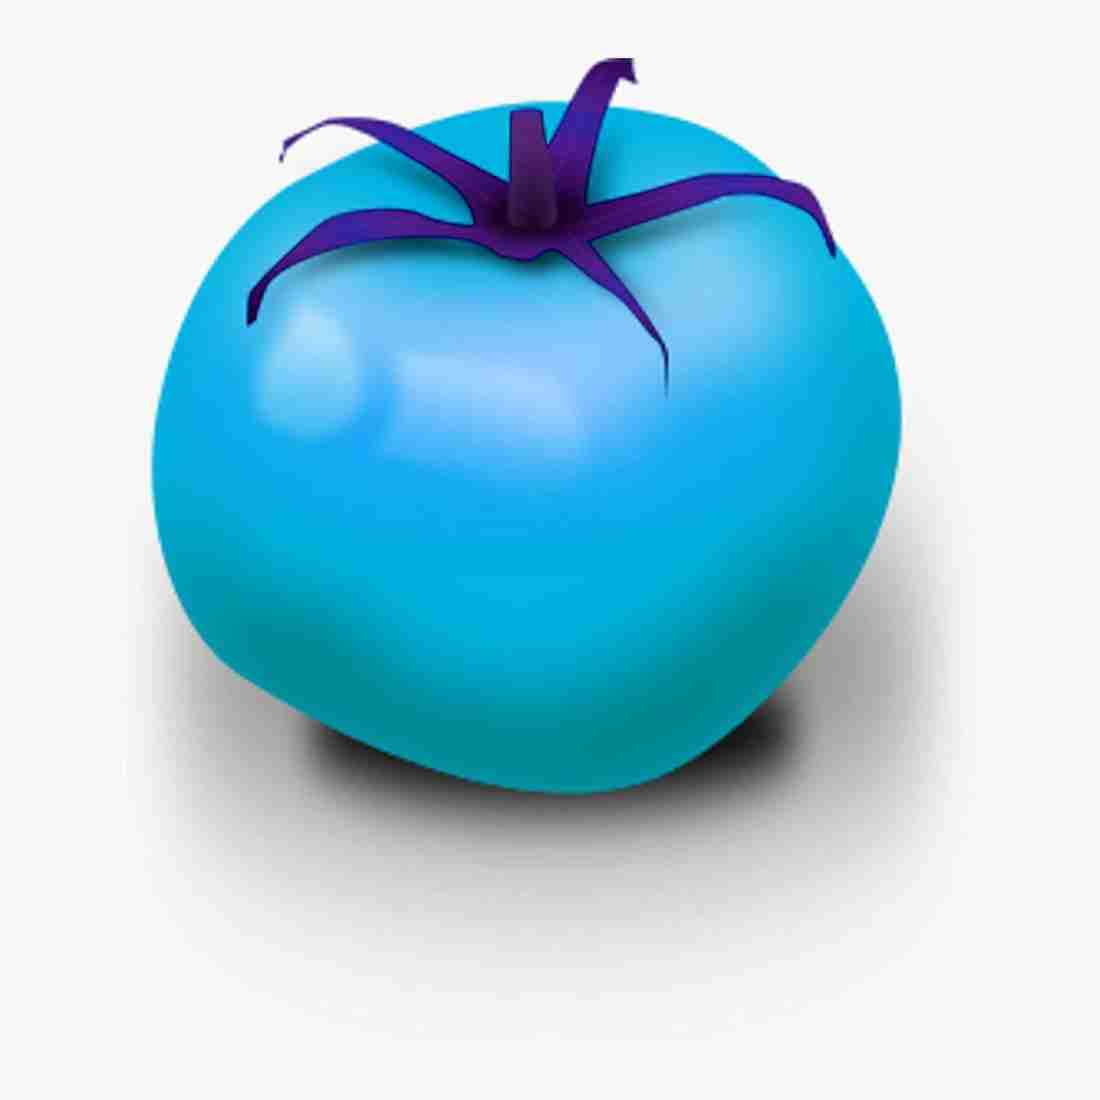 CYBEXIS Hardy Blue Tomato Seeds1000 Seeds Seed Price in India - Buy CYBEXIS  Hardy Blue Tomato Seeds1000 Seeds Seed online at